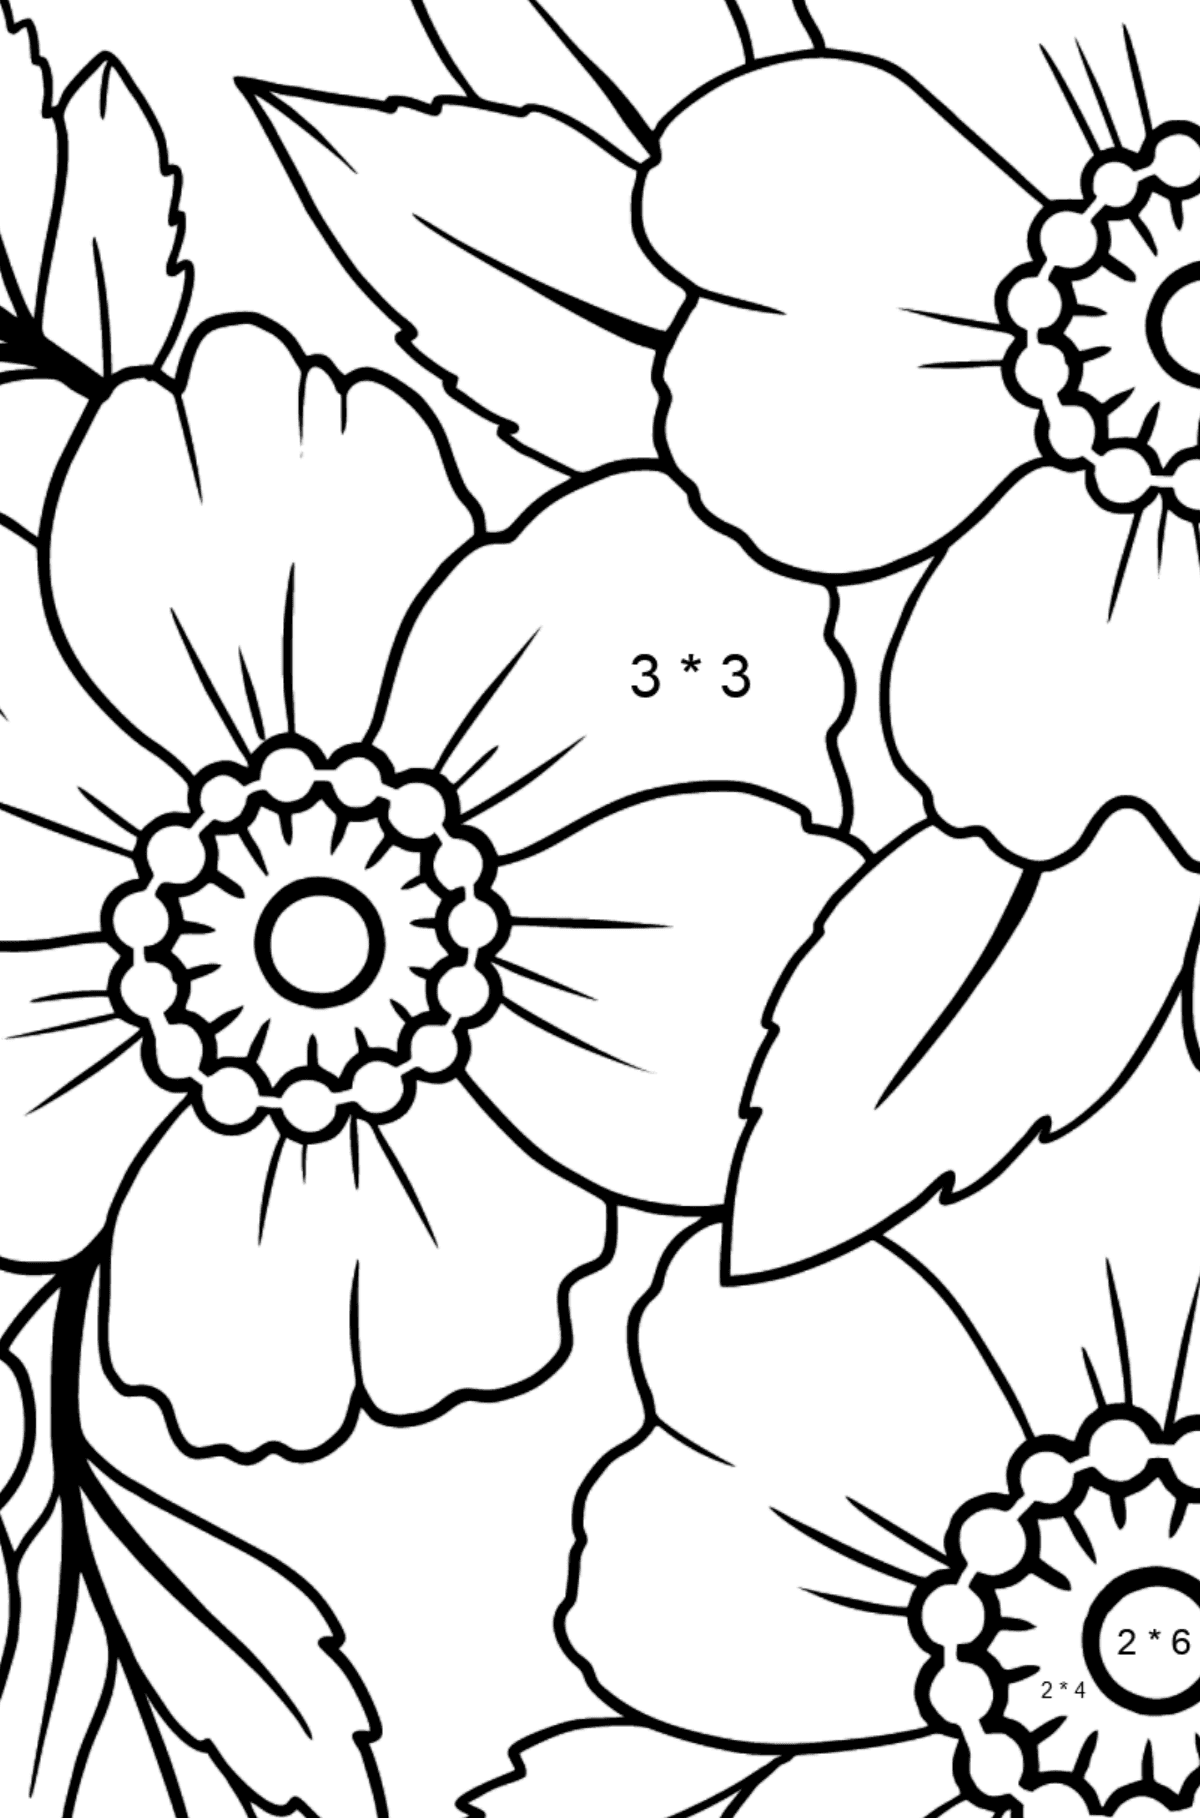 Flower Coloring Page - Japanese Velvet Anemone - Math Coloring - Multiplication for Kids